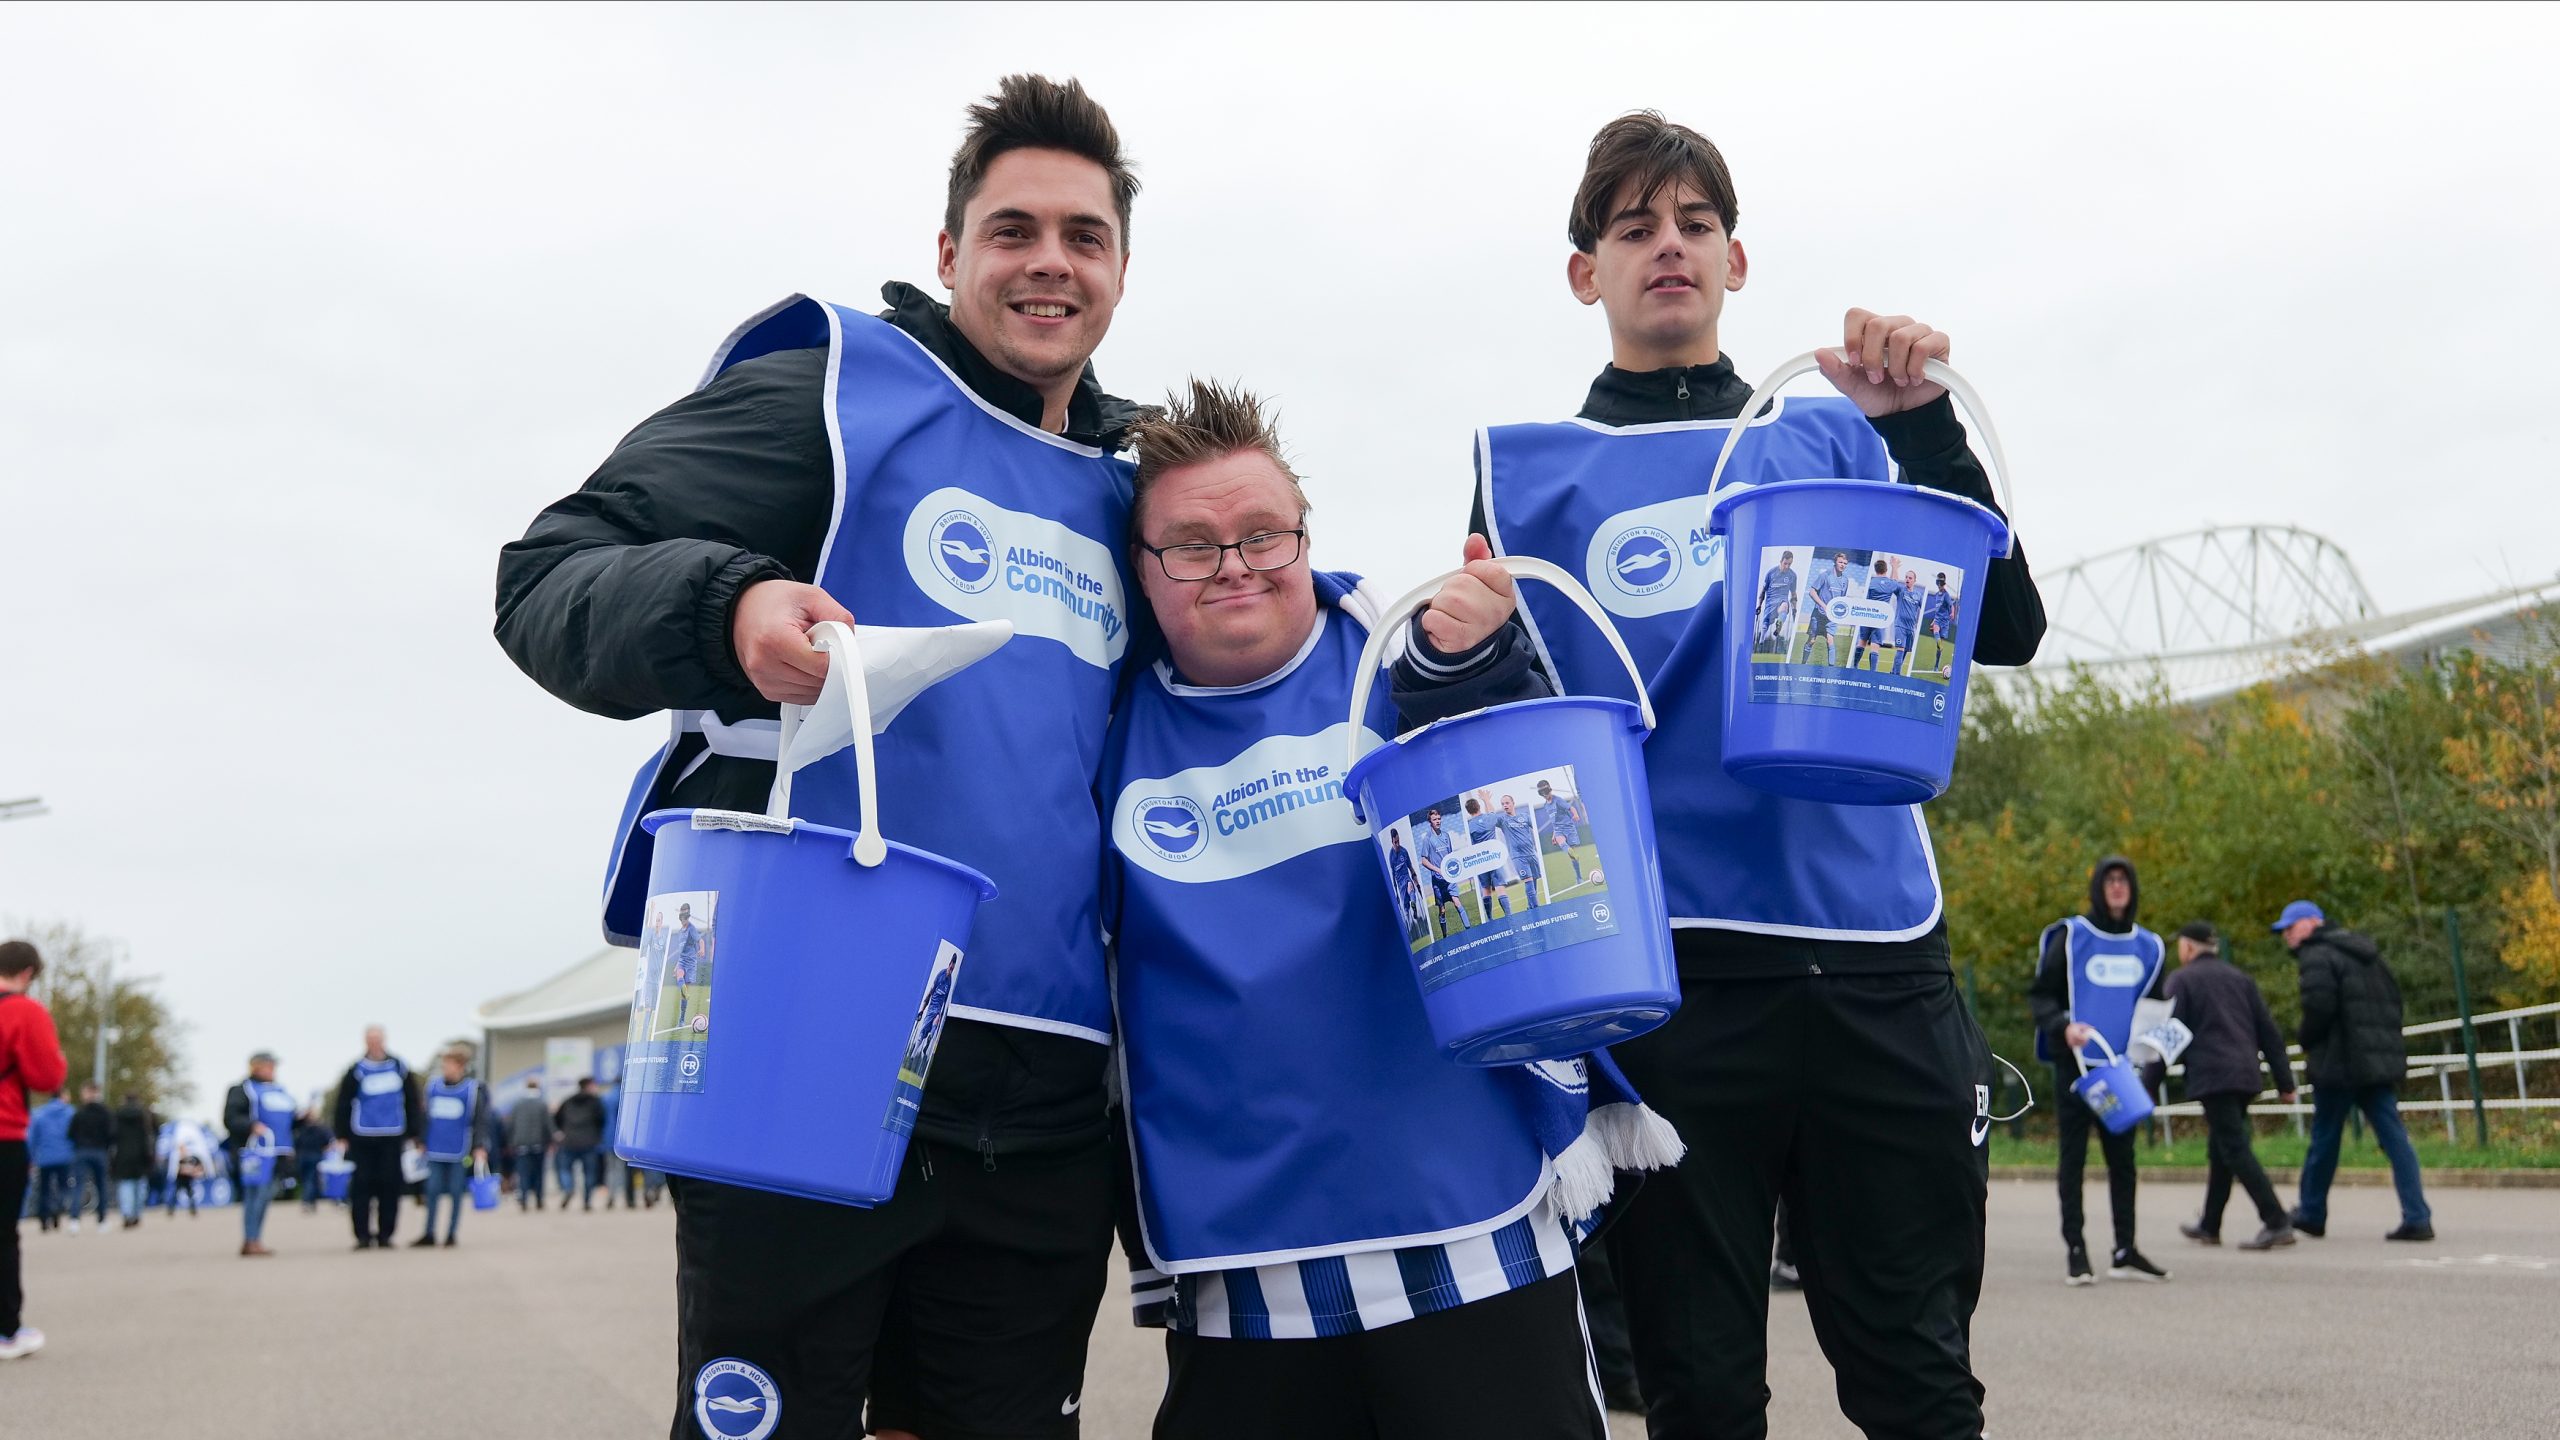 Fans donate £27,000 to Albion in the Community